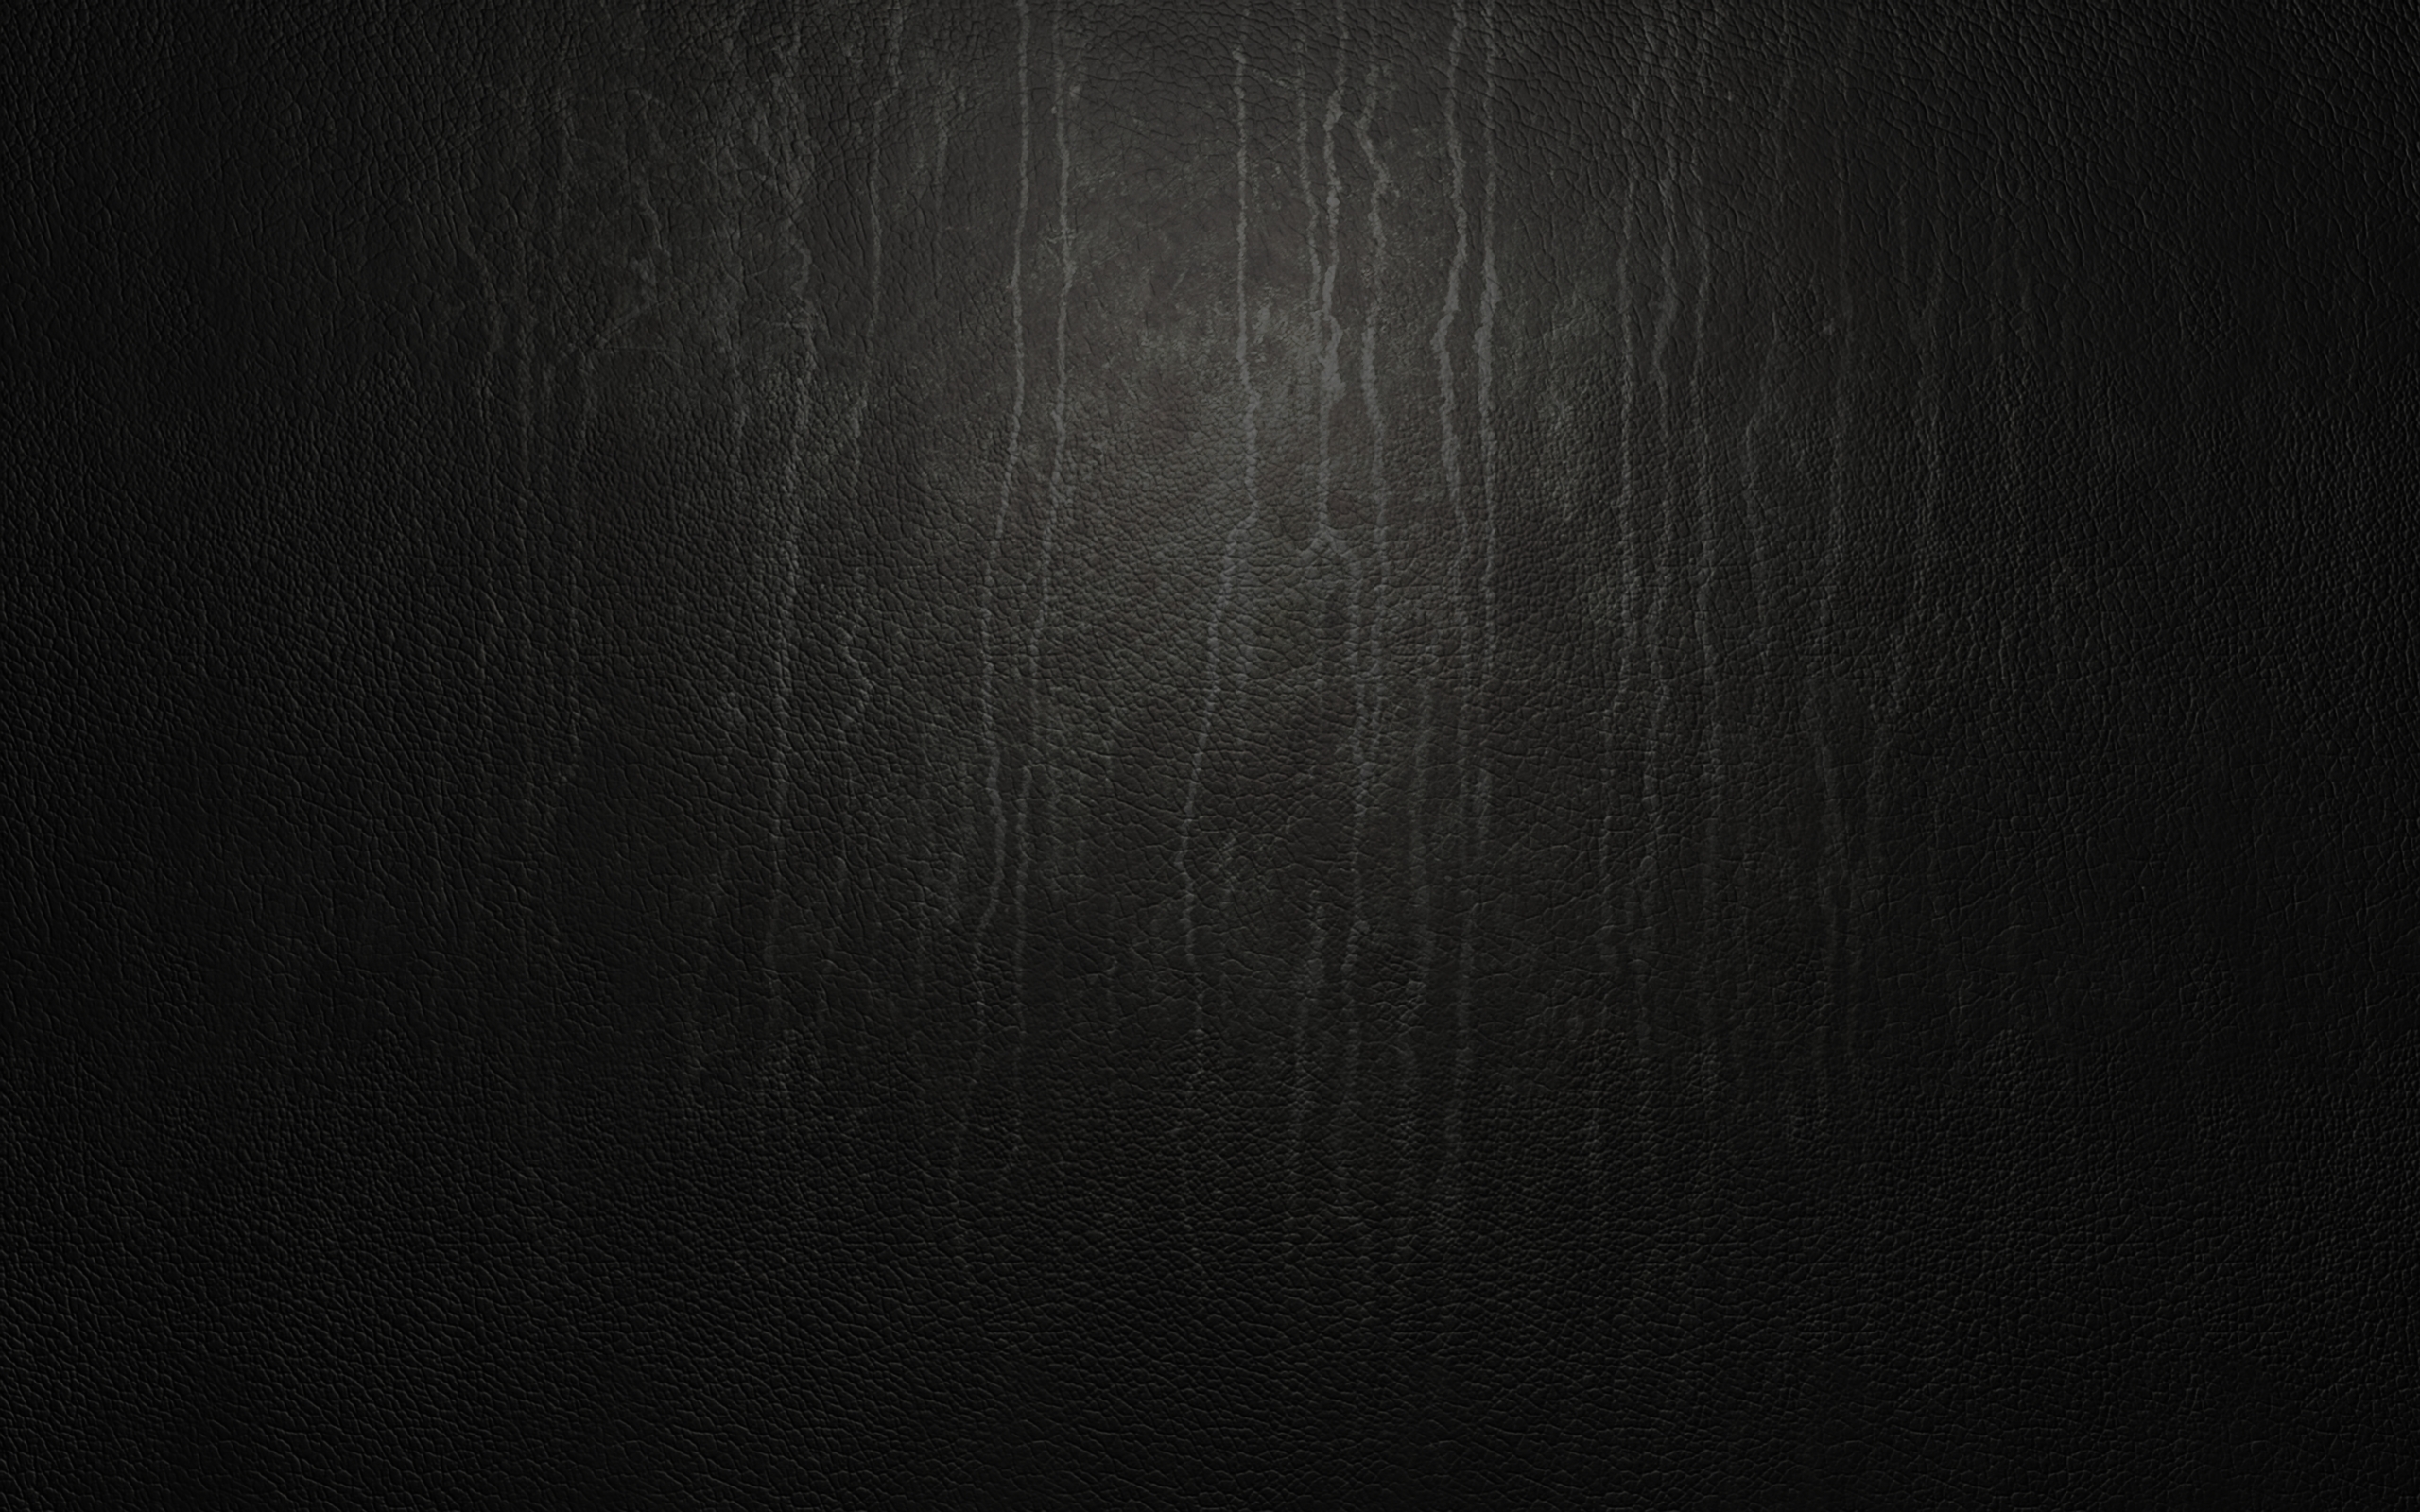 black leather background, download photo, black leather texture, background